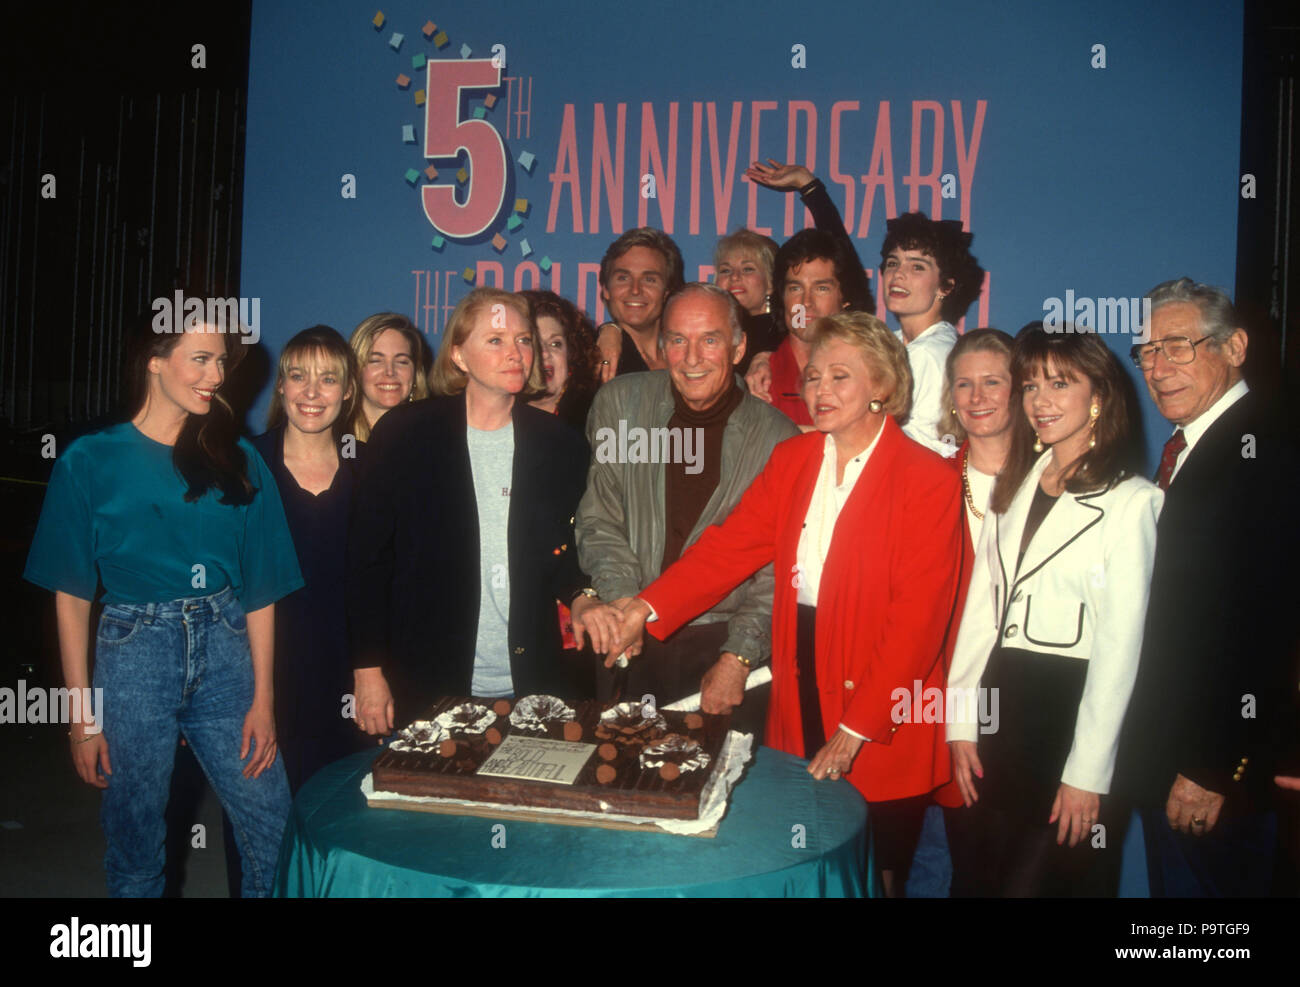 LOS ANGELES, CA - MARCH 23: Actress Hunter Tylo, actress Joanna Johnson, actress Susan Flannery, actor Jeff Trachta, creators William J. Bell and Lee Phillip Bell, actor Ronn Moss, actress Colleen Dion, actress Bobbie Eakes and guests attend 5th Anniversary Celebration for 'The Bold and the Beautiful' soap opera on March 23, 1992 at CBS Television City in Los Angeles, California. Photo by Barry King/Alamy Stock Photo Stock Photo